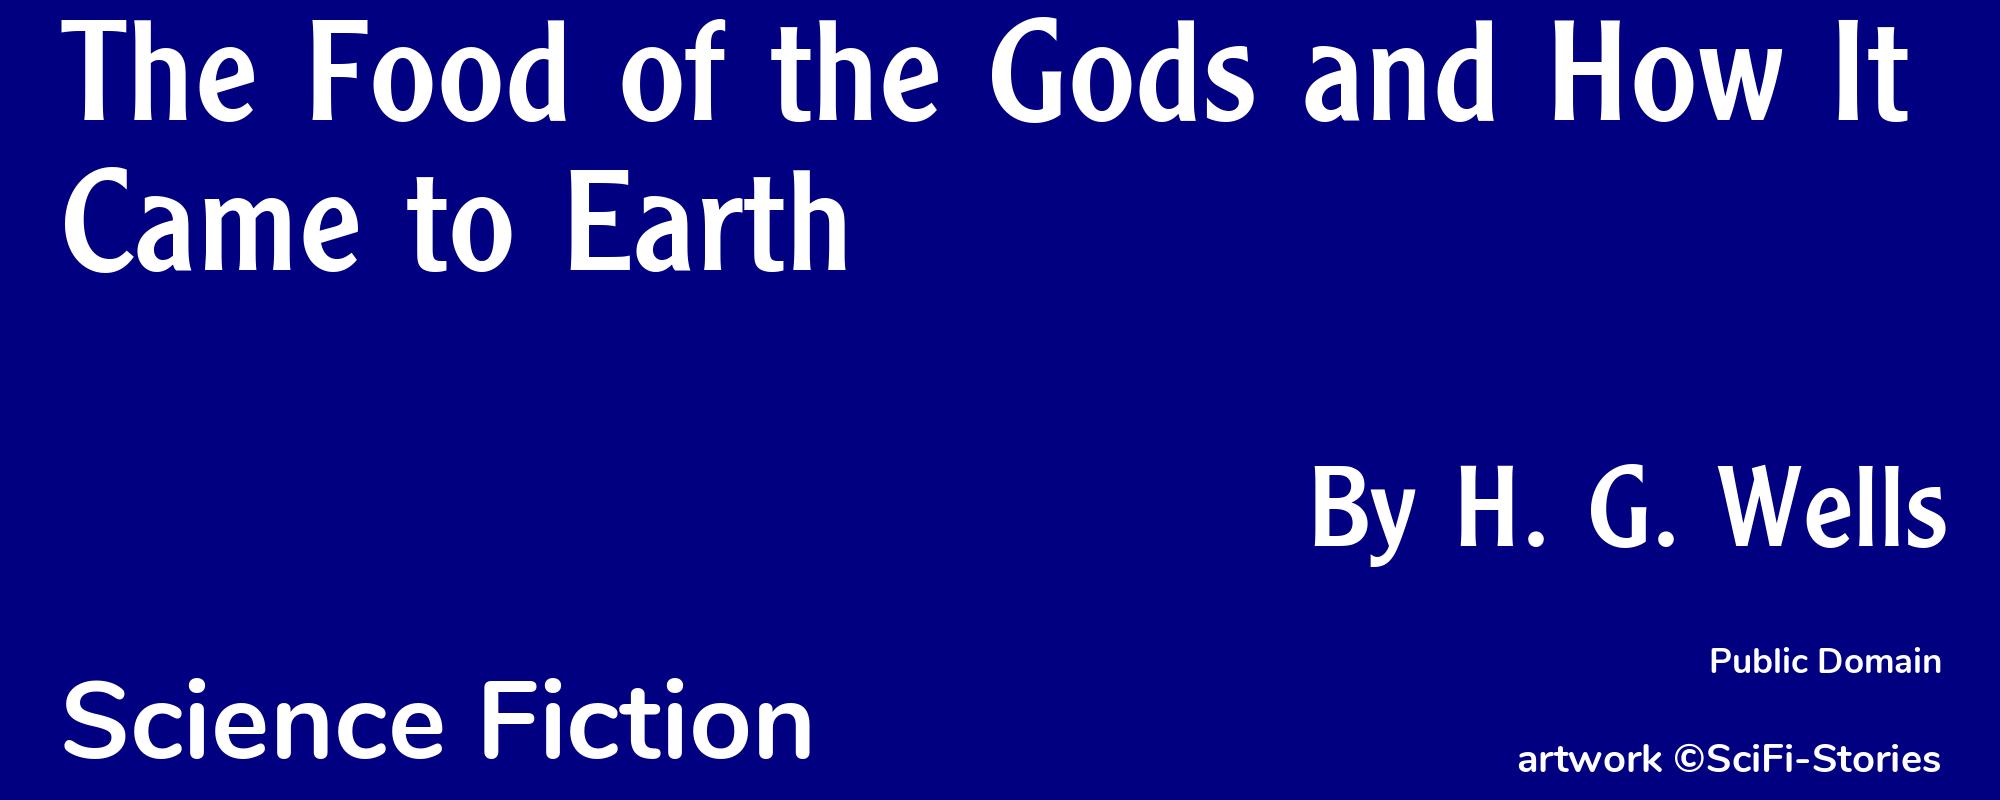 The Food of the Gods and How It Came to Earth - Cover